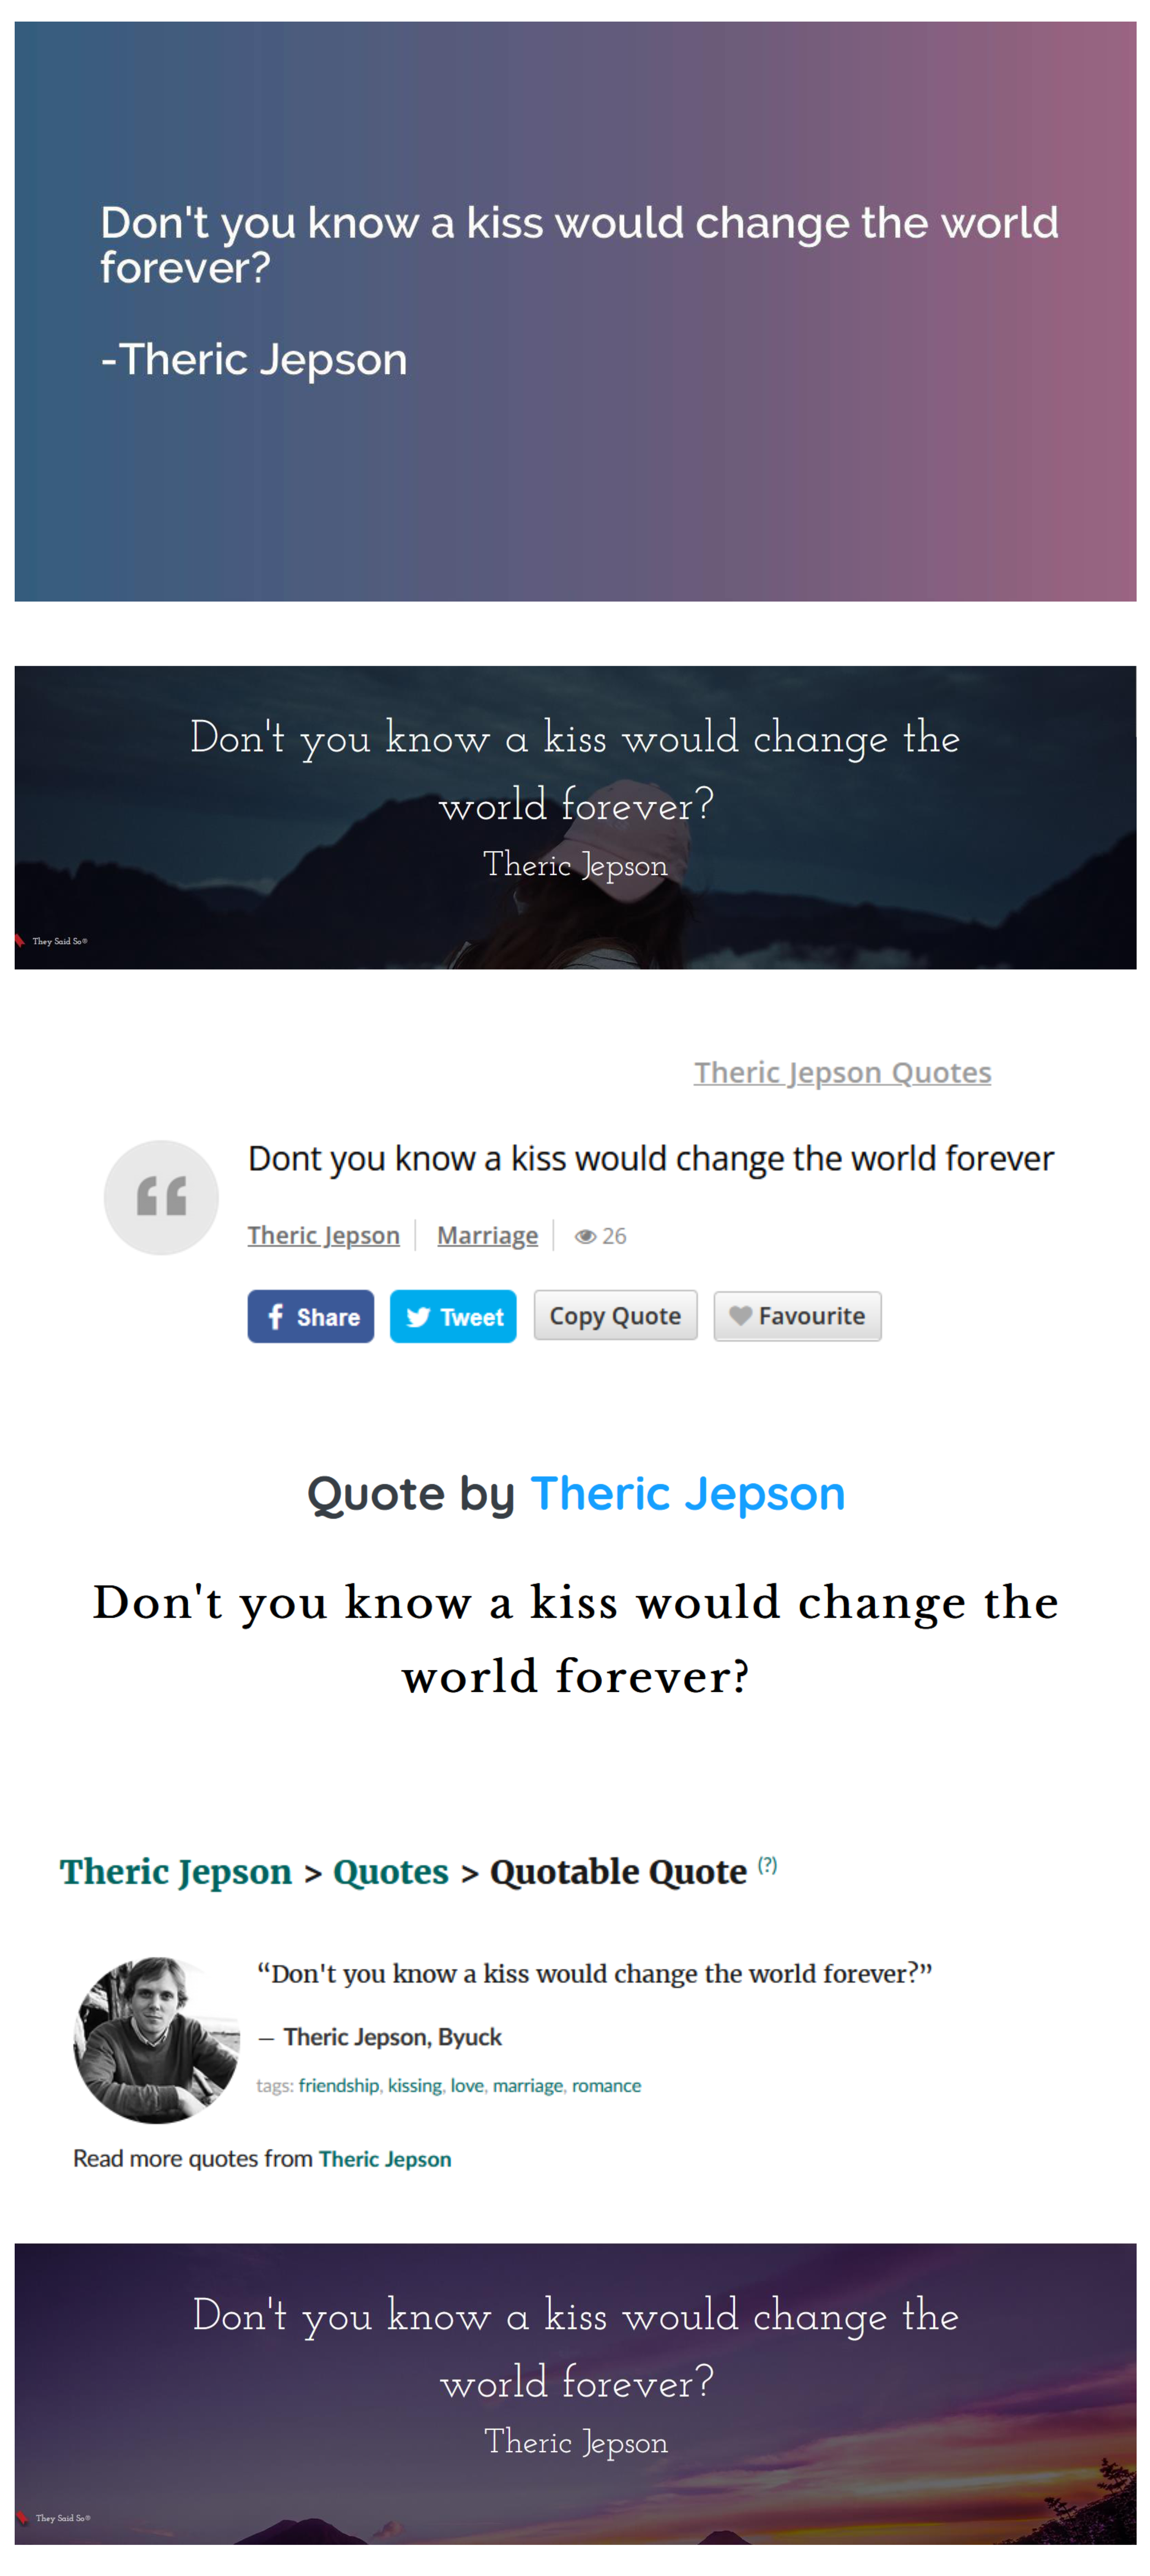 Don't you know a kiss would change the world forever?